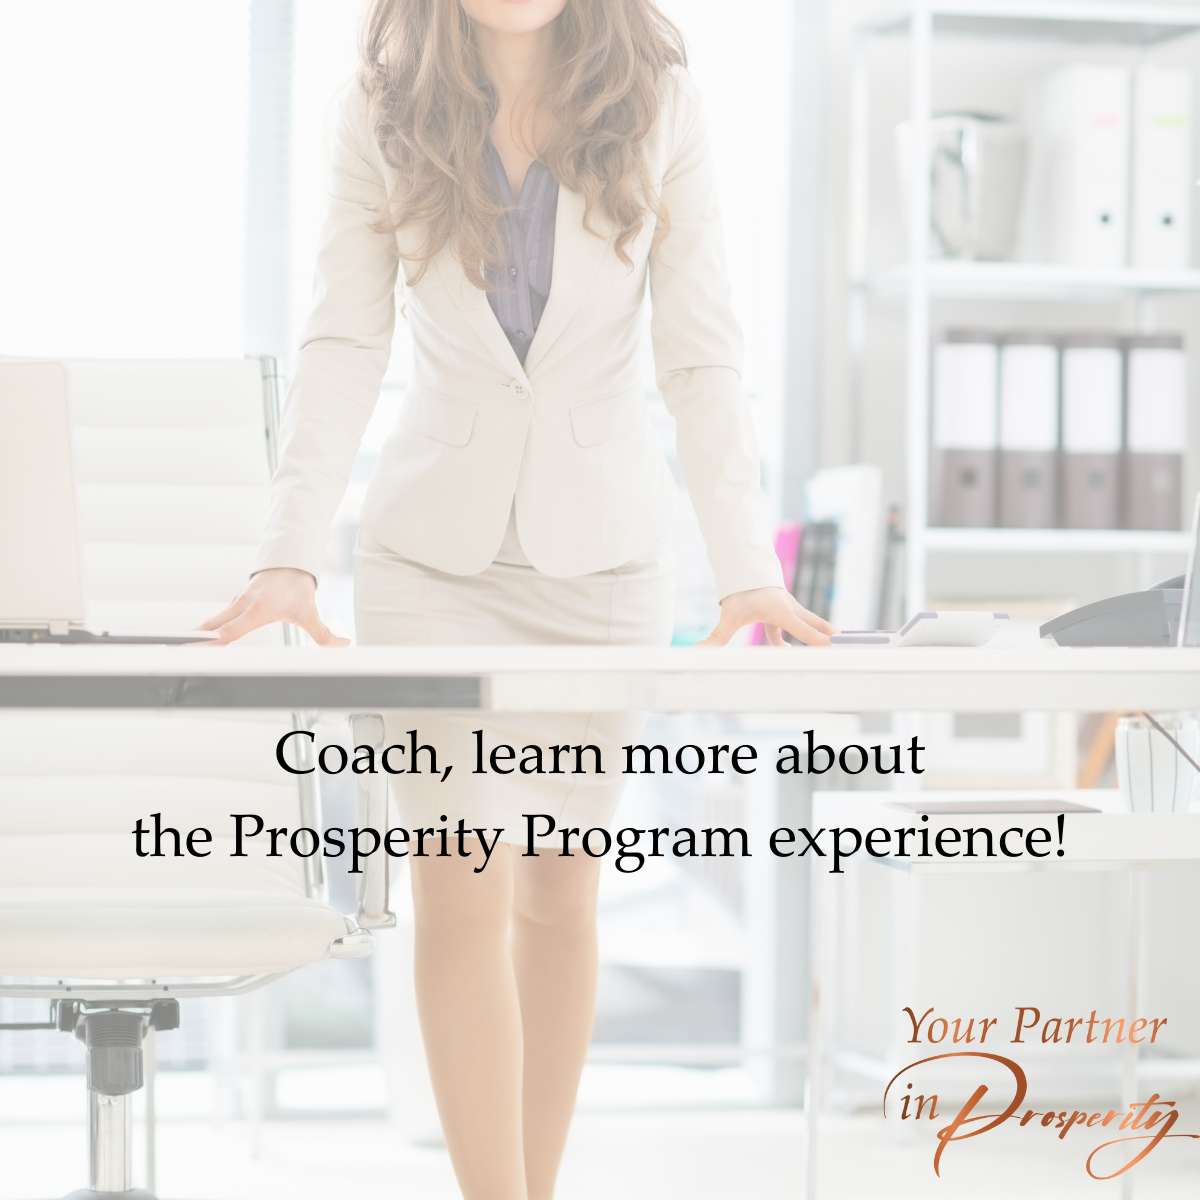 Coach, learn more about the Prosperity Program experience!